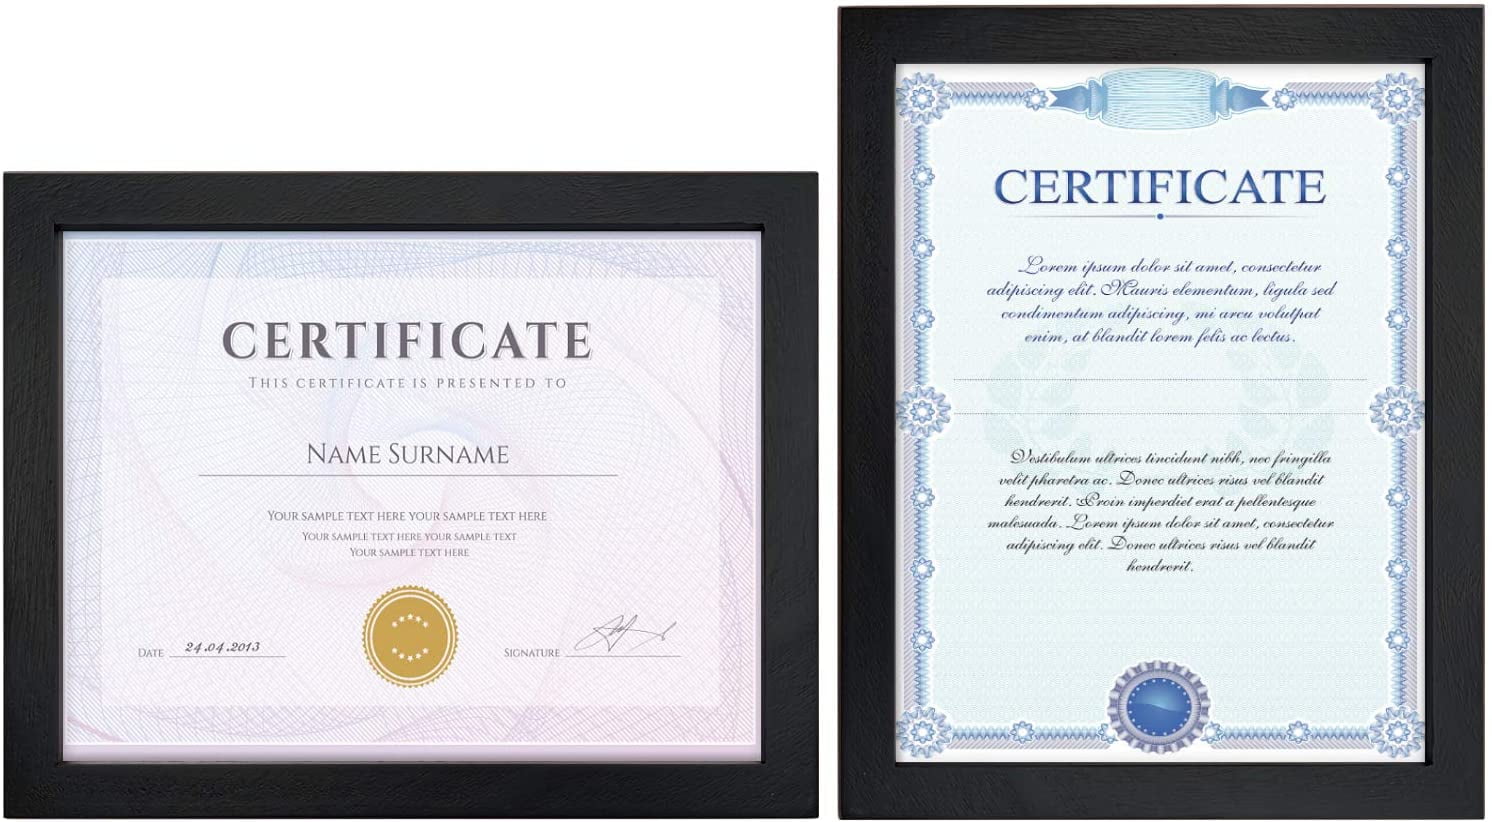 Document Frames Made of Solid Wood & Real Glass Diploma Frames Display 8.5 x 11 Picture for Wall or Tabletop Set of 2 Black Emfogo 8.5x11 Certificate Frames